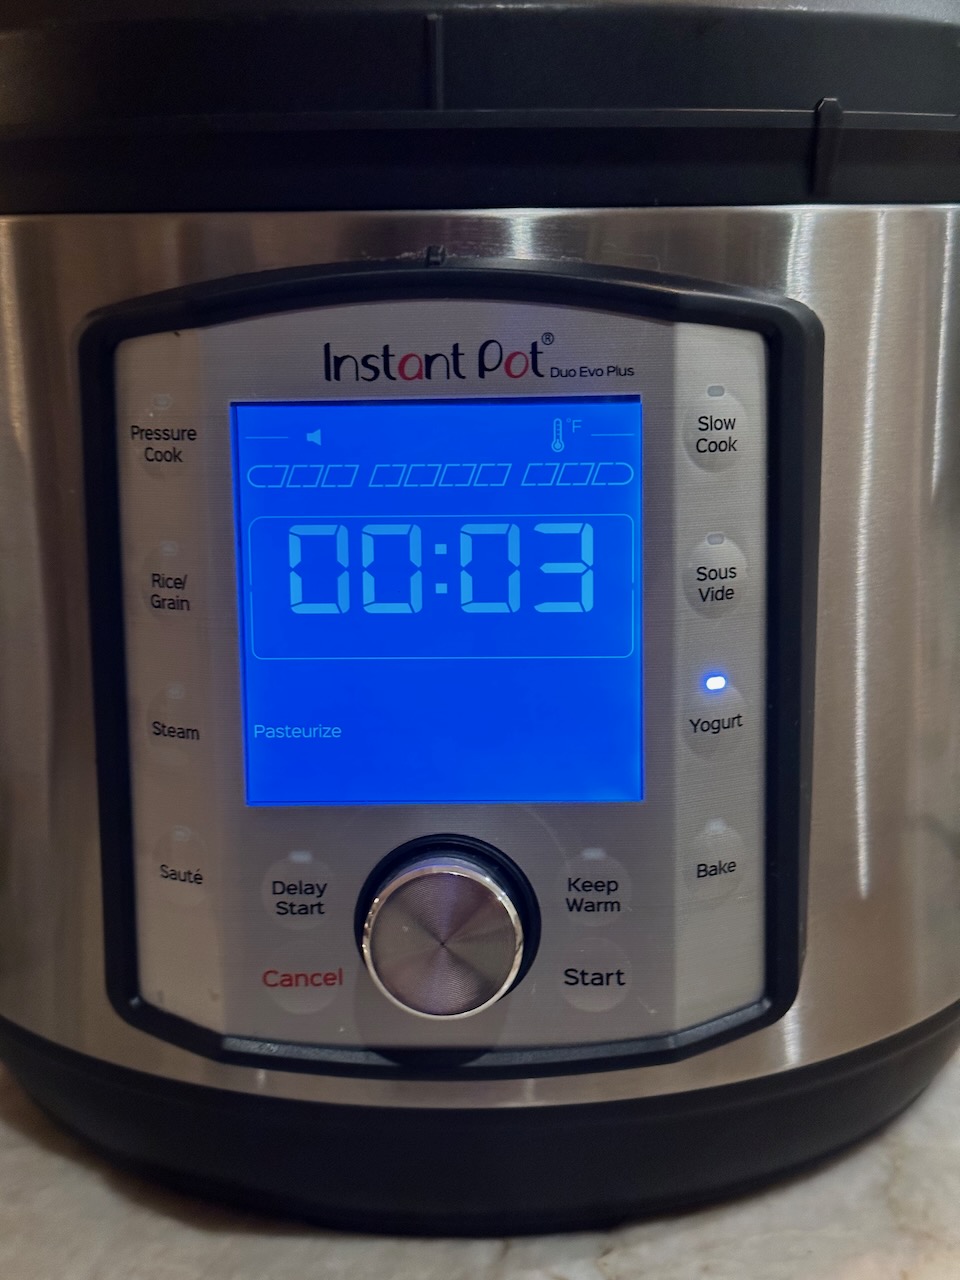 the lit up LCD display of an instant pot, the Yogurt button is illuminated, and the display shows "0:03 Pasteurize"